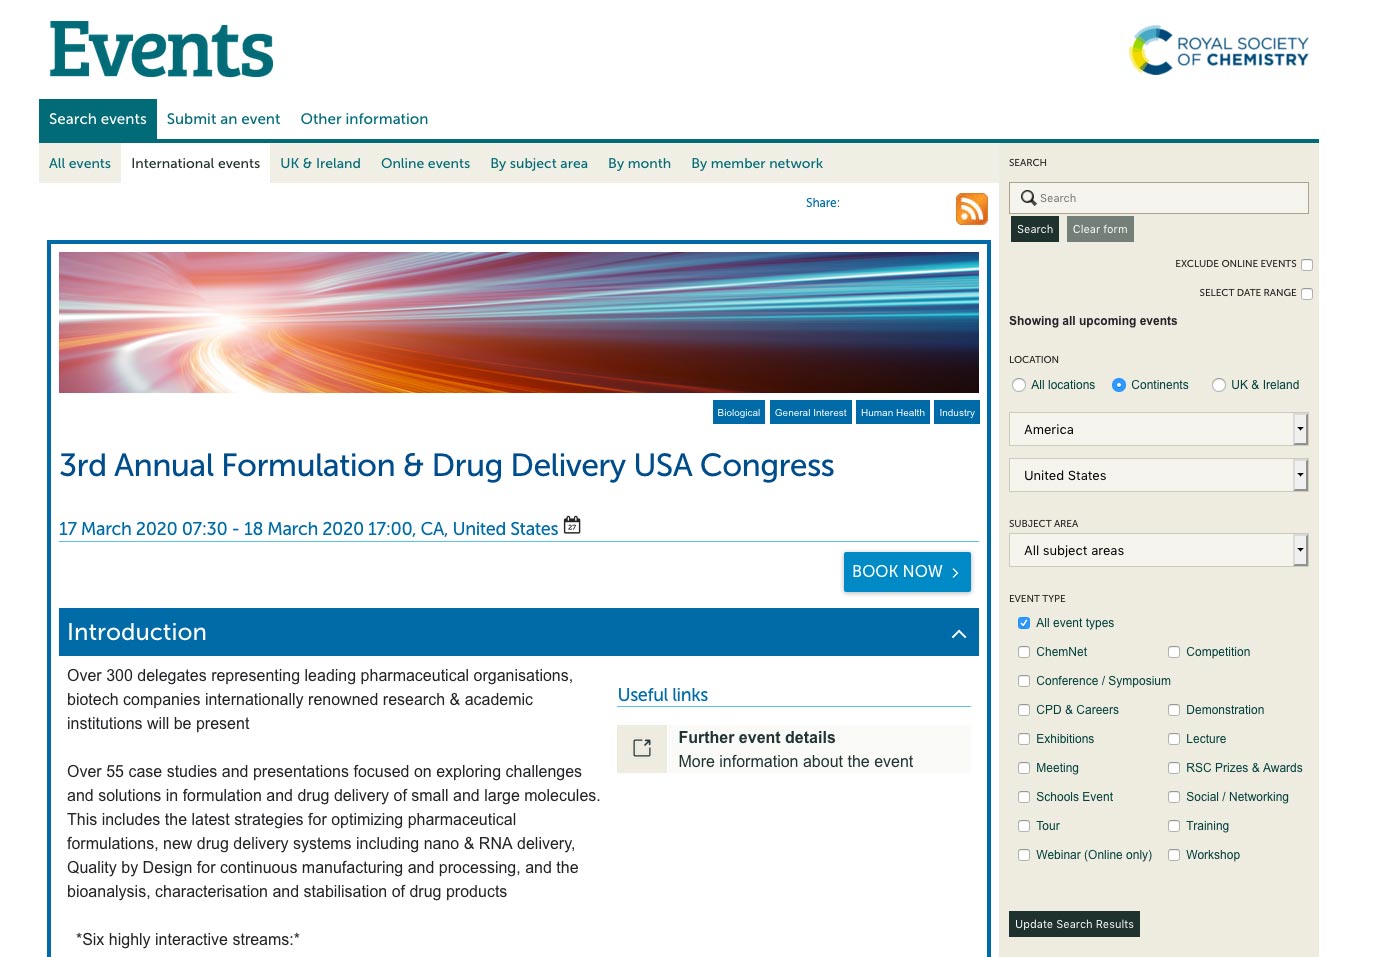 The Royal Society of Chemistry, 3rd Annual Formulation & Drug Delivery USA Congress